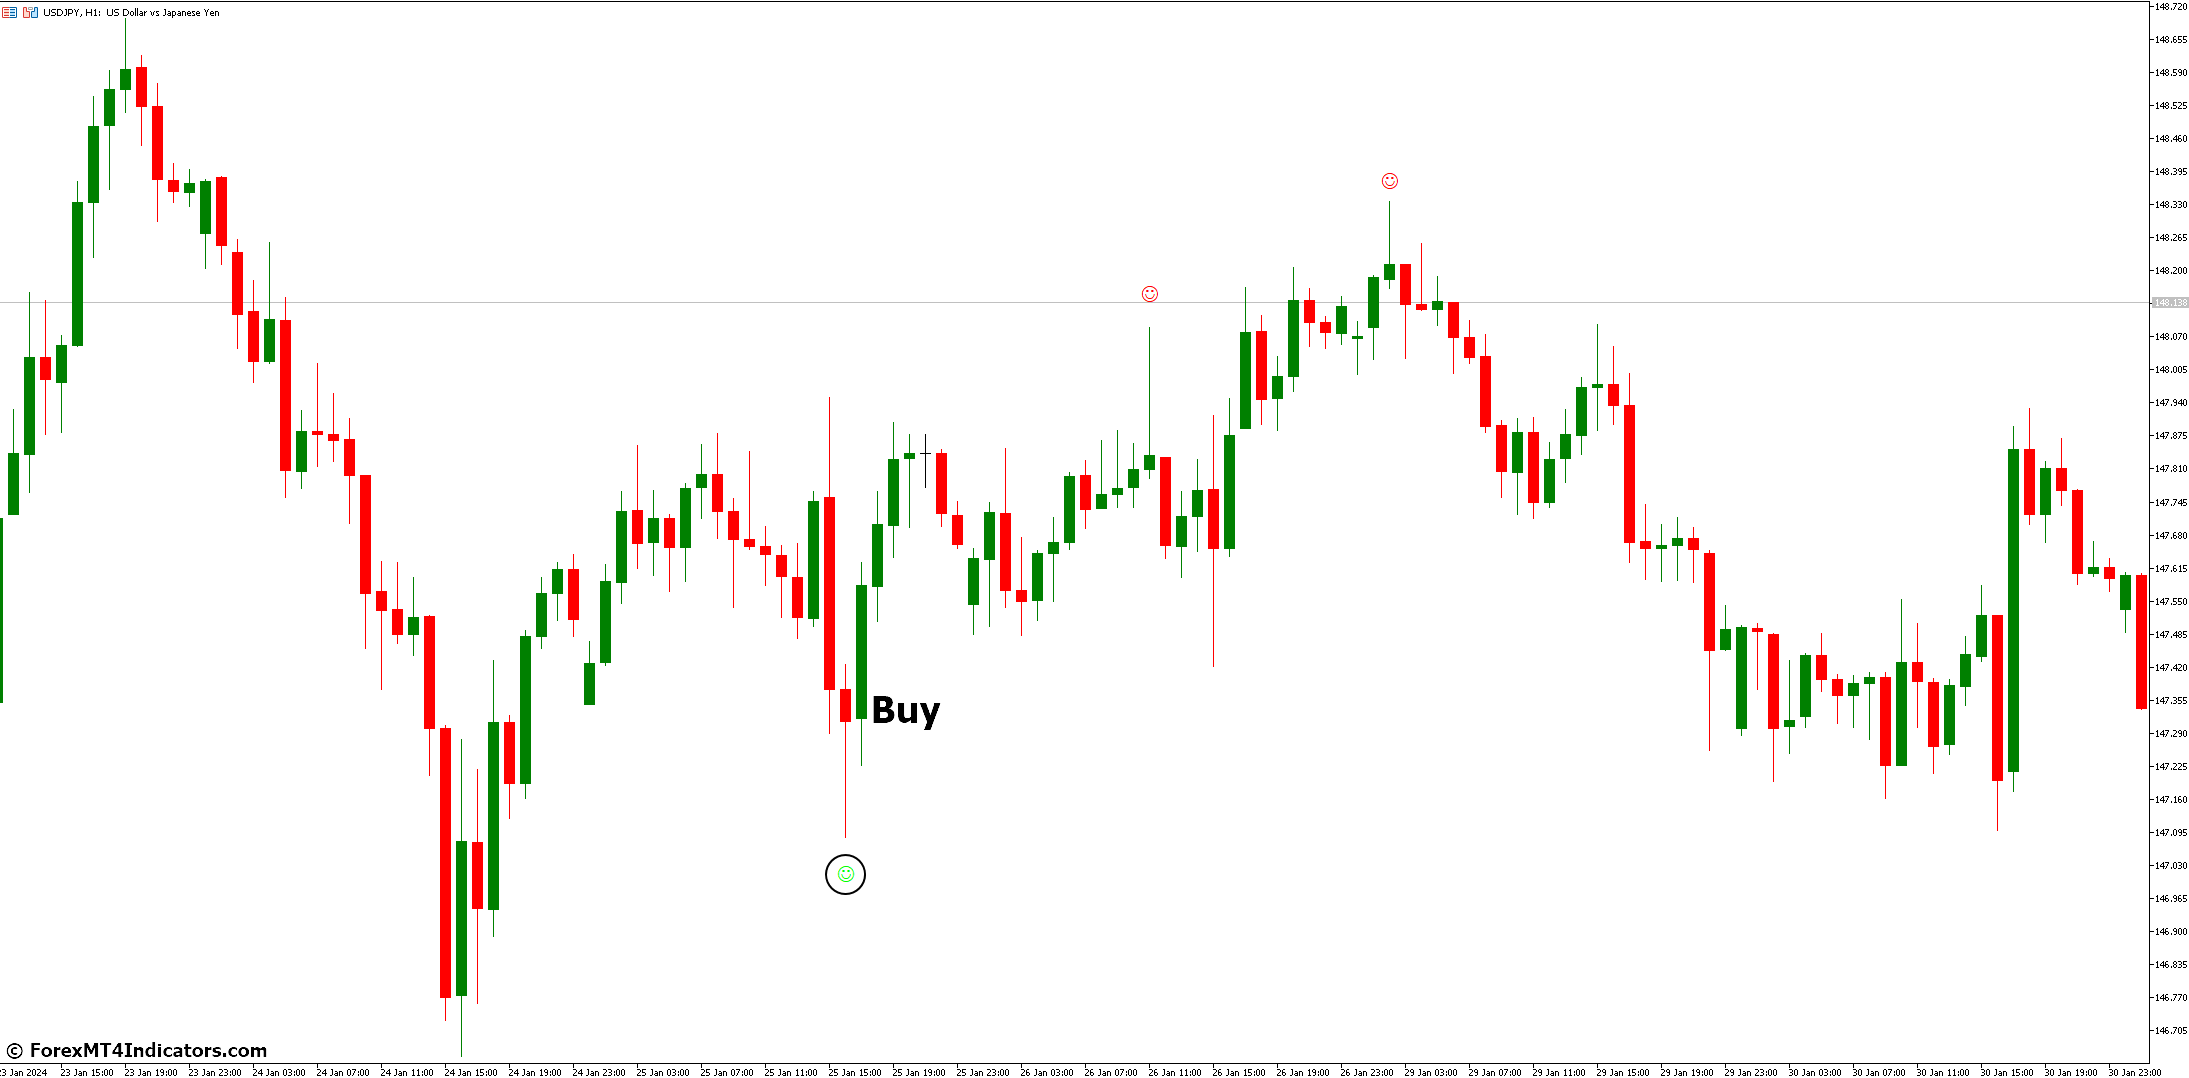 How to Trade with Pinbar Detector Indicator - Buy Entry